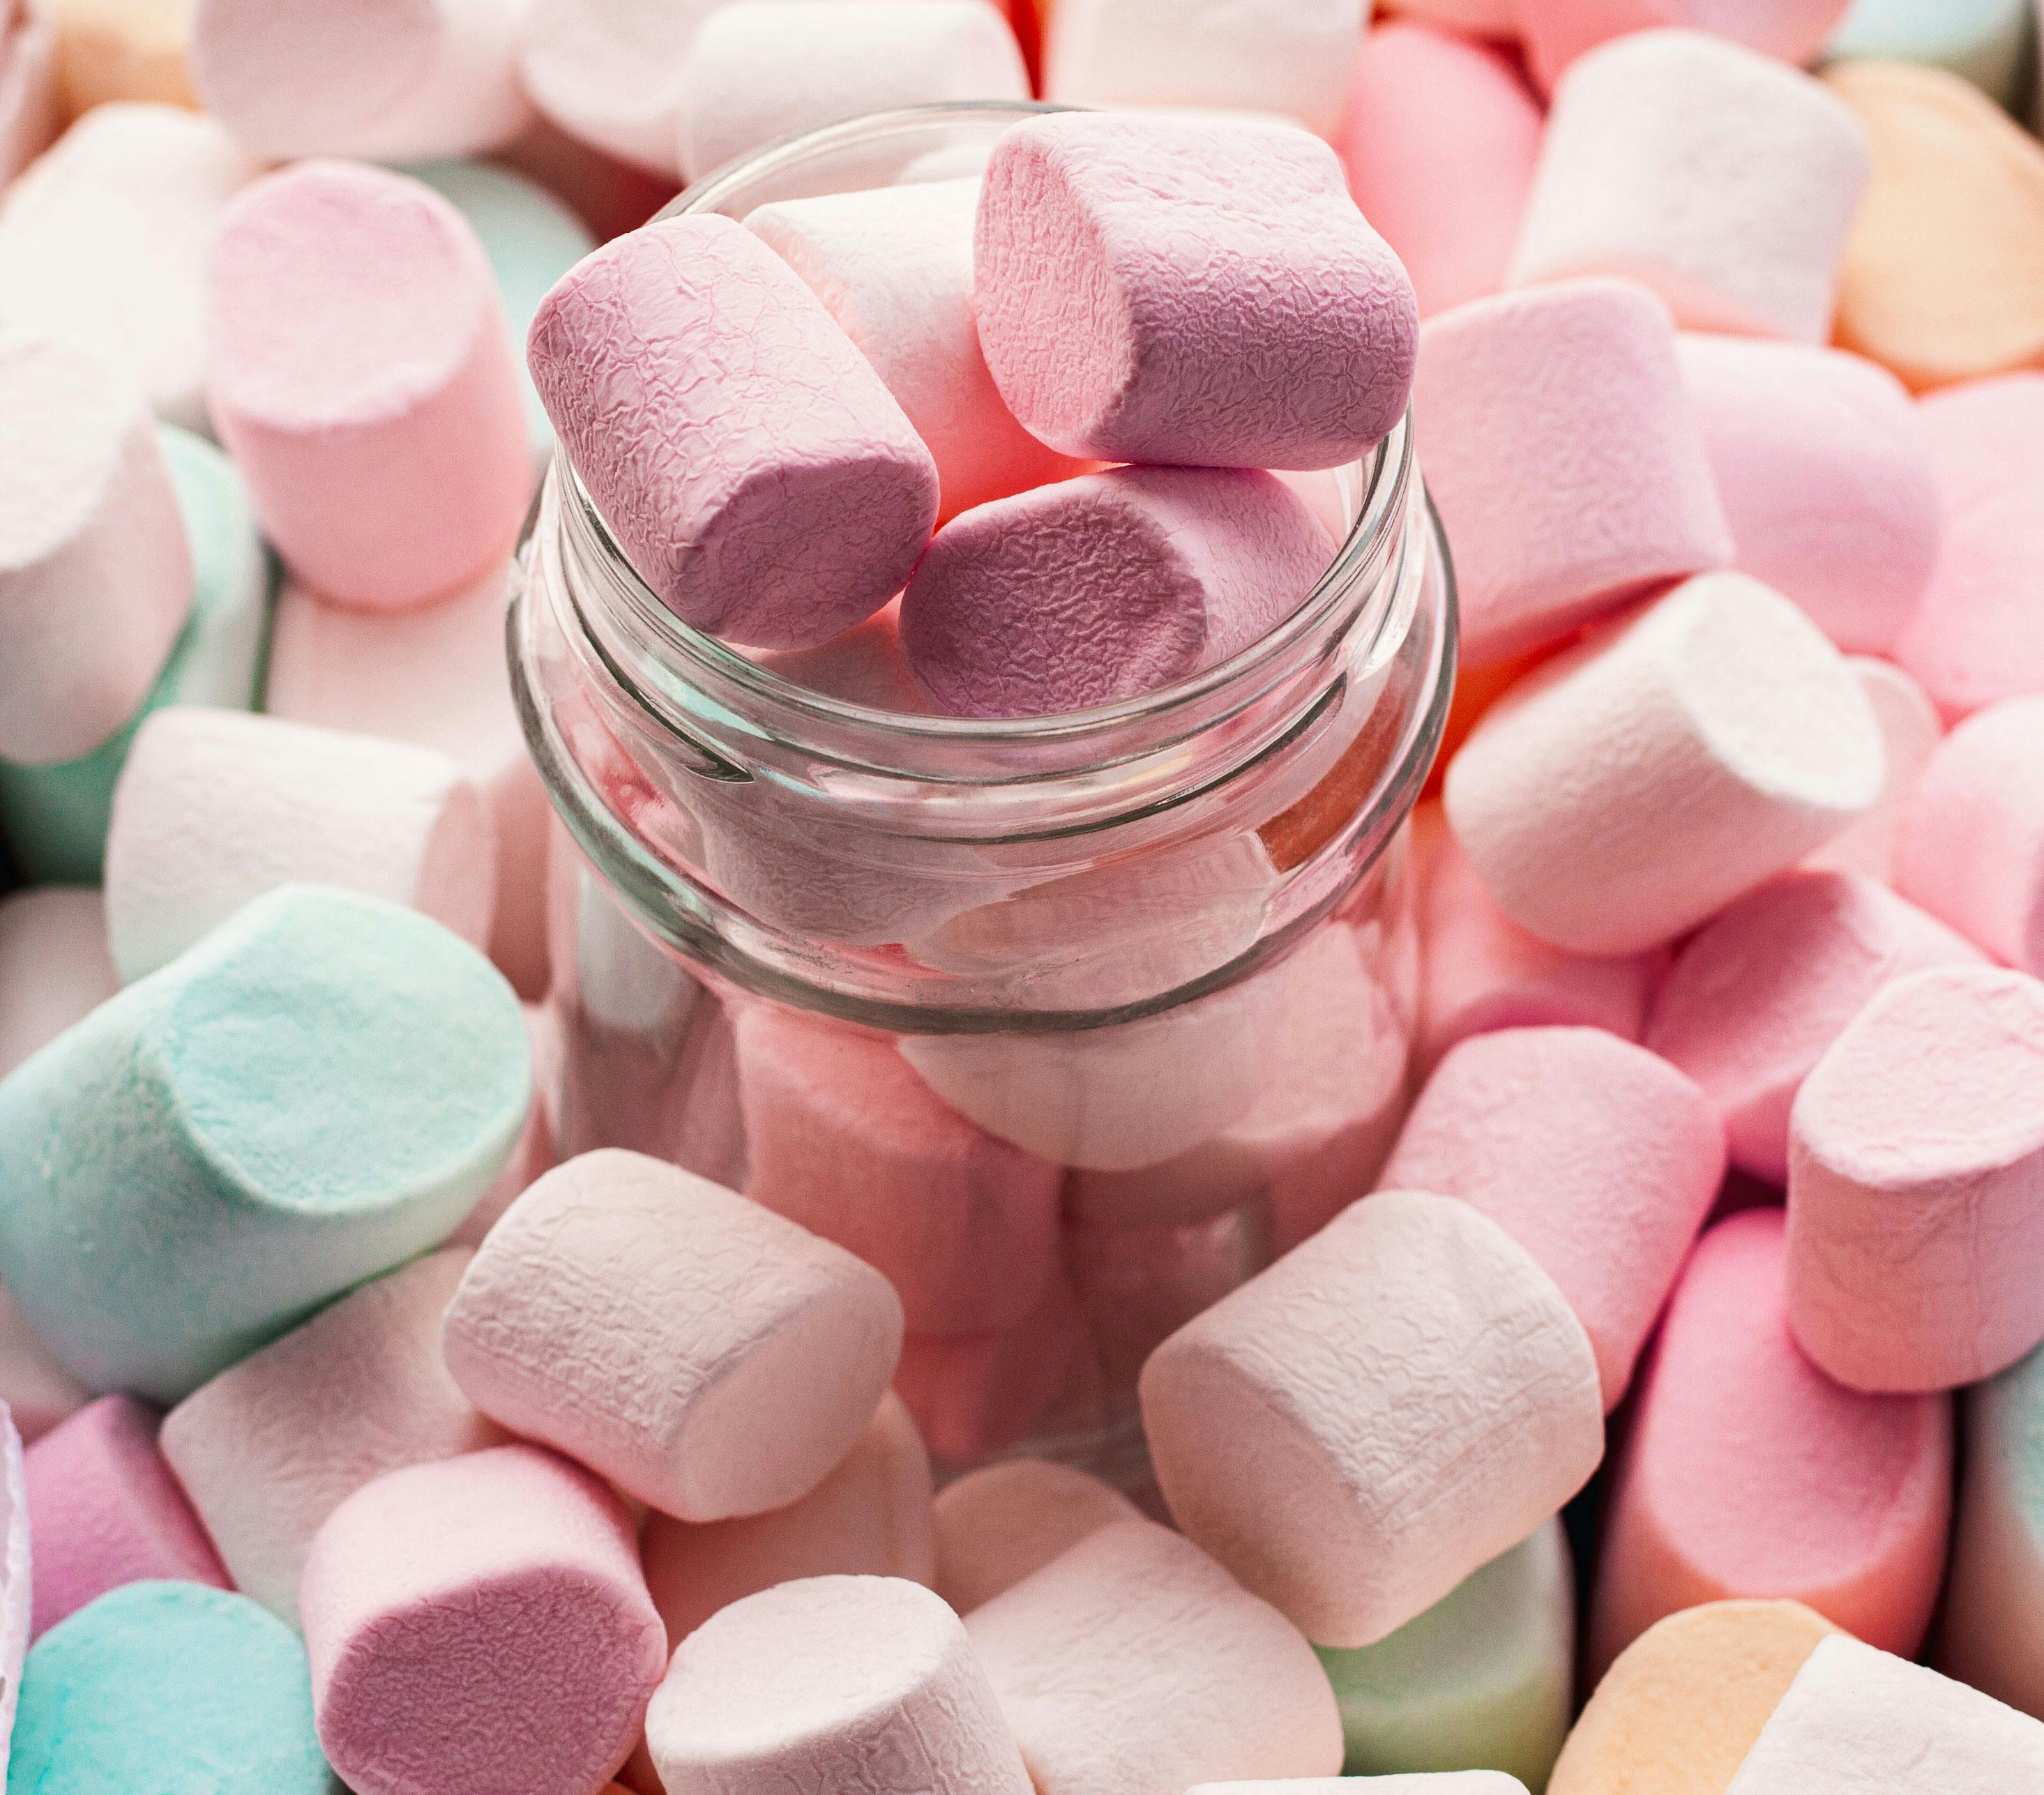 A jar of marshmallows in a variety of colors. - Marshmallows